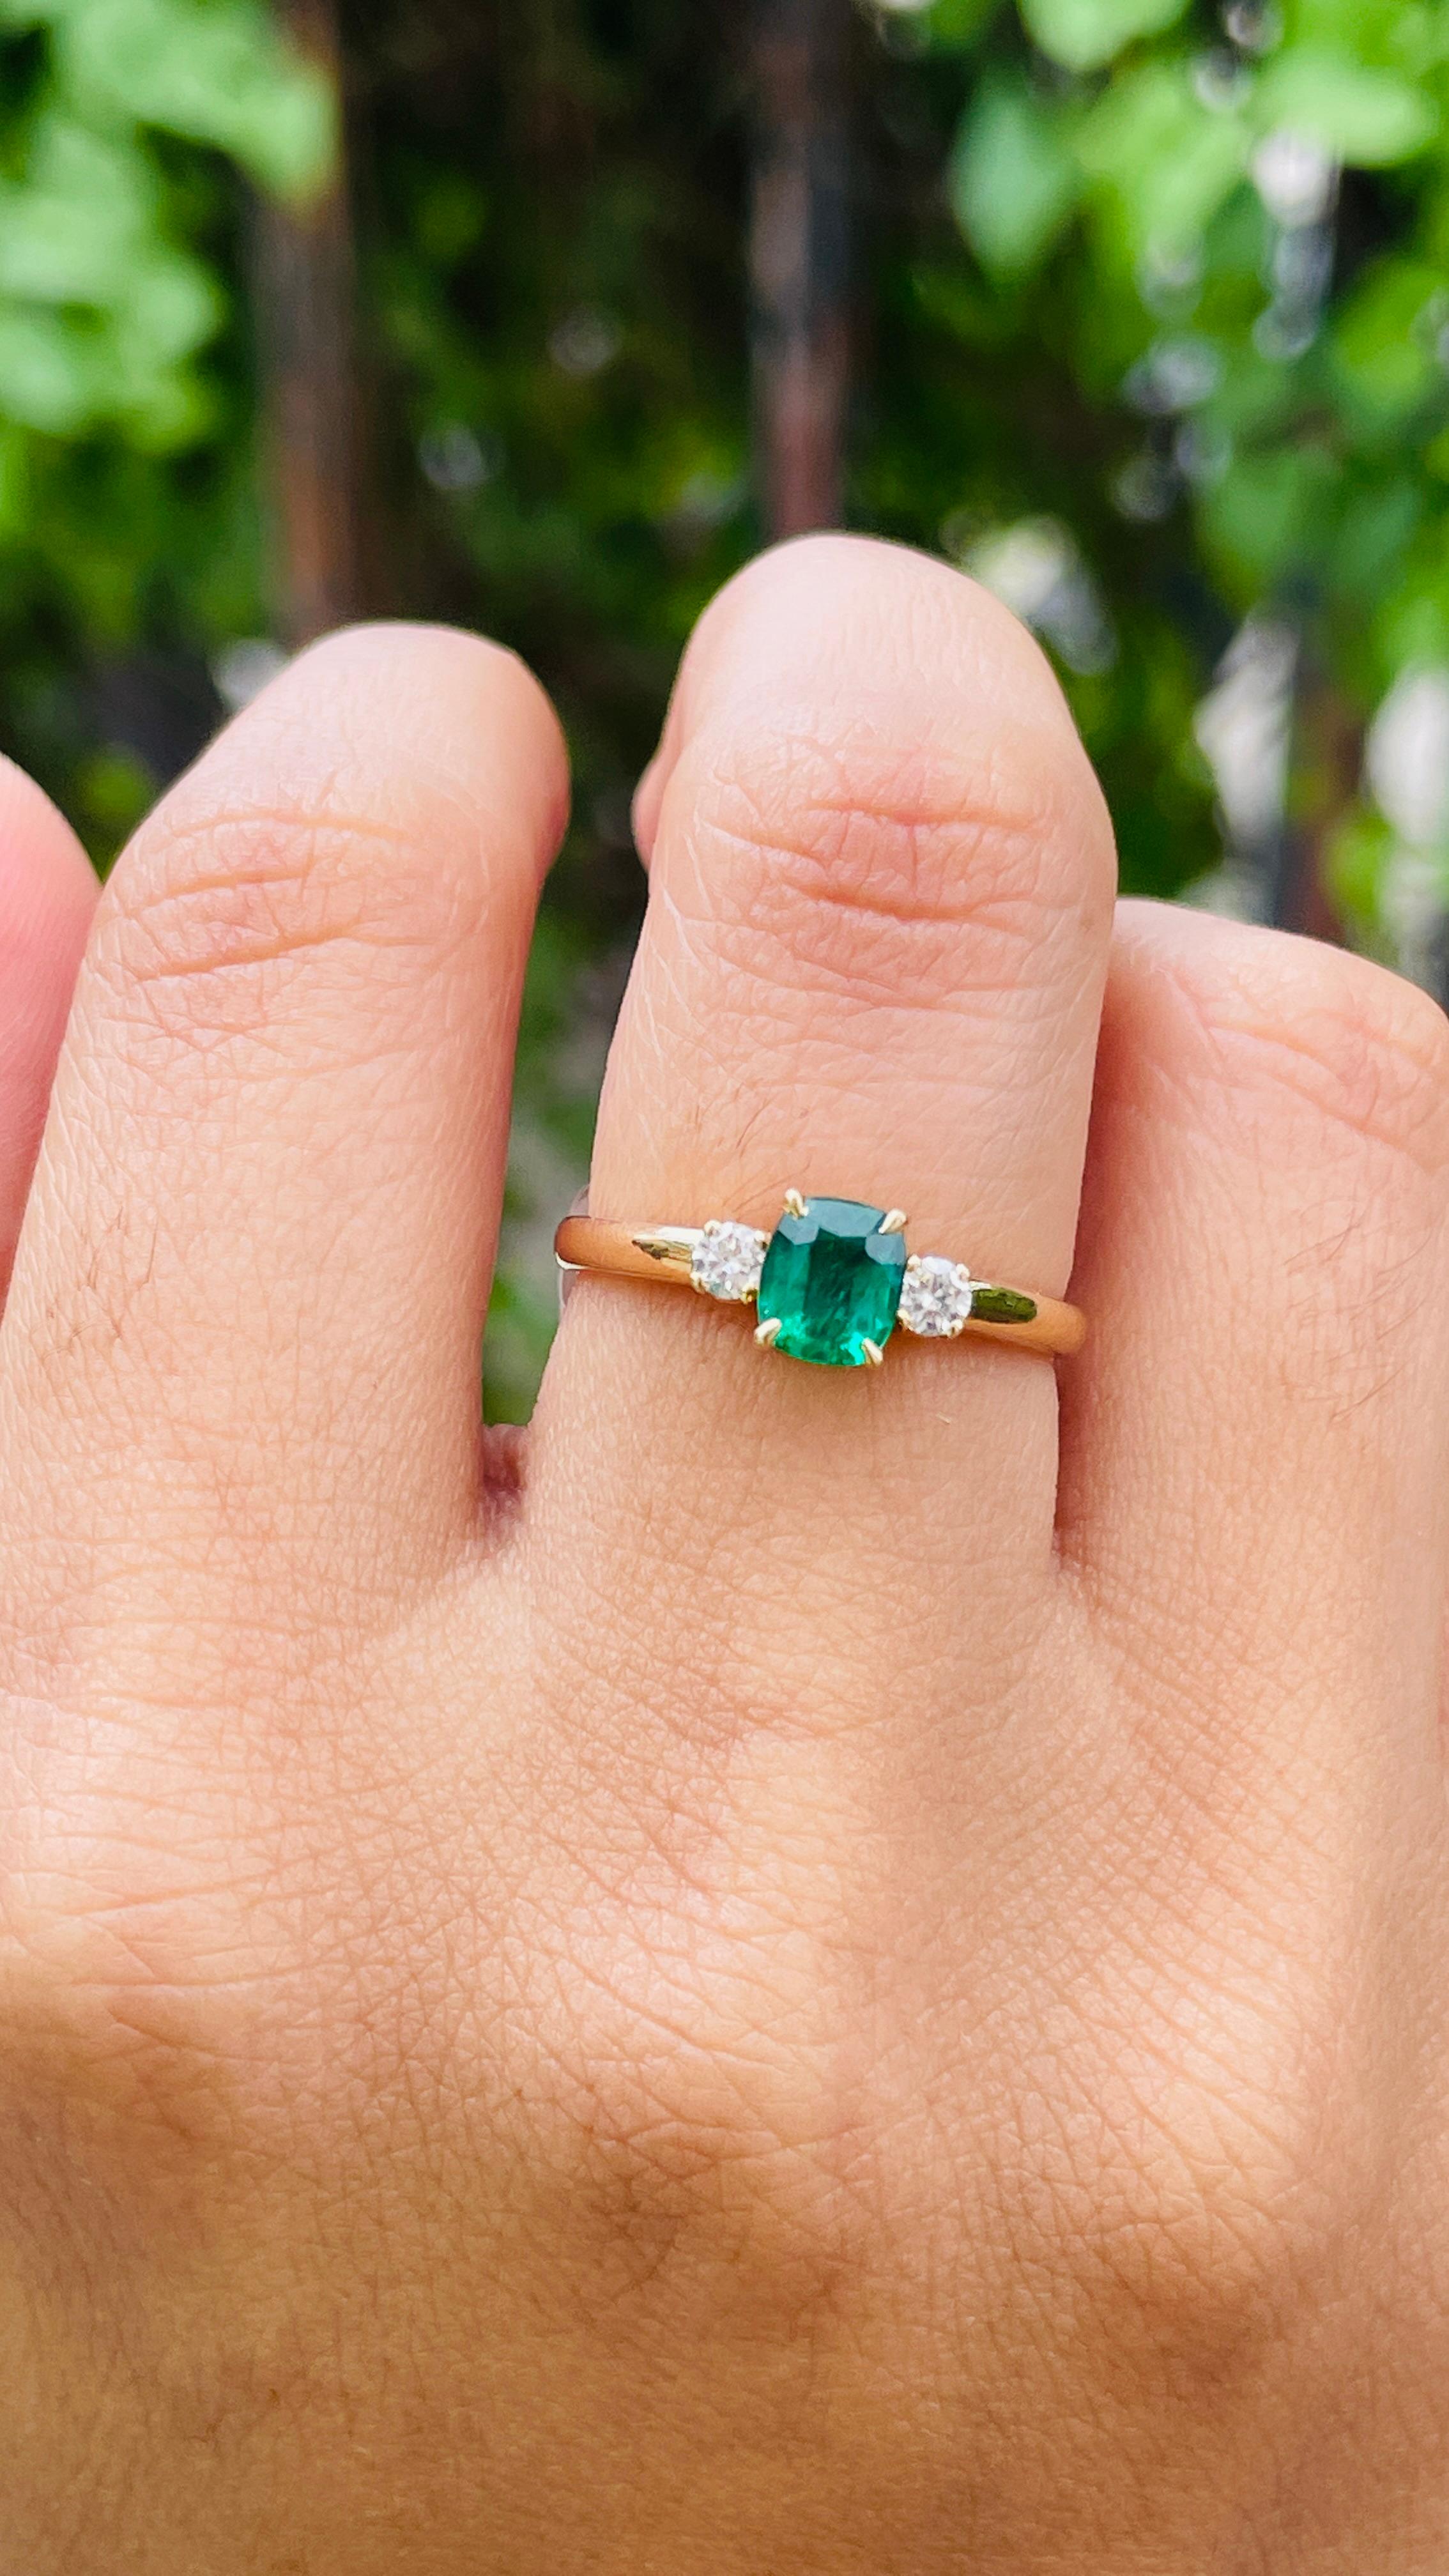 For Sale:  Emerald Gemstone Ring in 18k Solid Yellow Gold with Diamonds 2